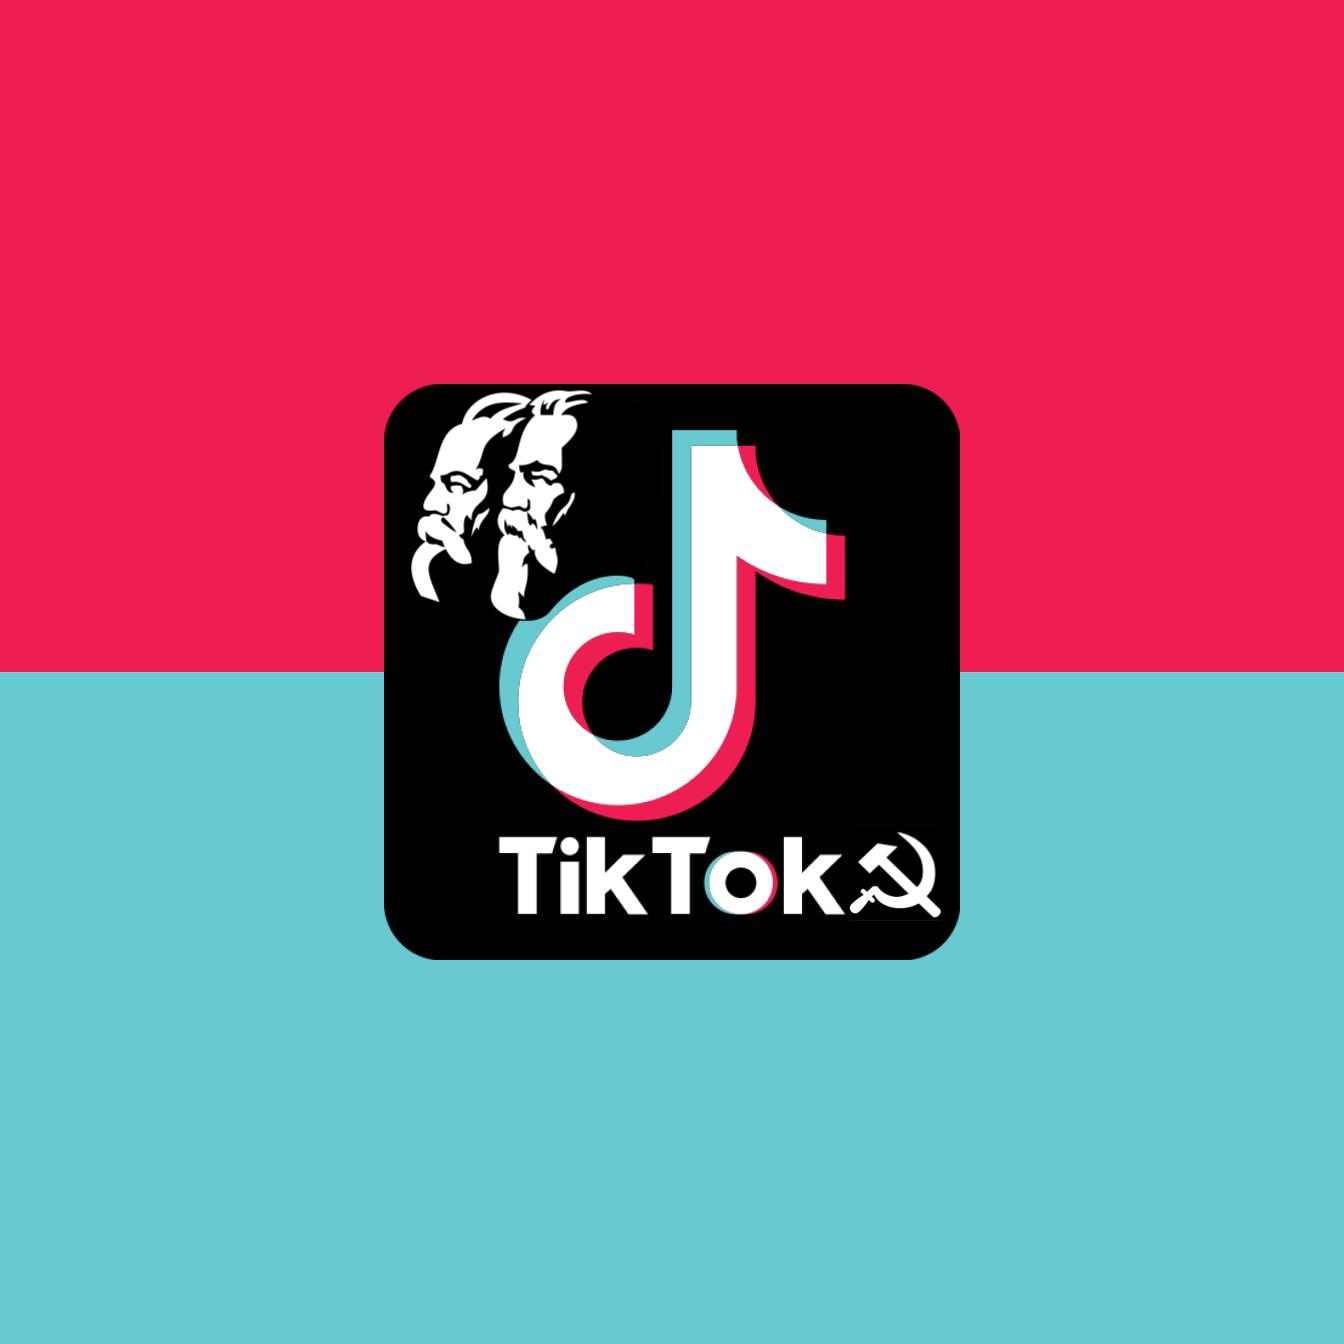 What does the proletariat stand to gain or lose as TikTok becomes the heart of culture?